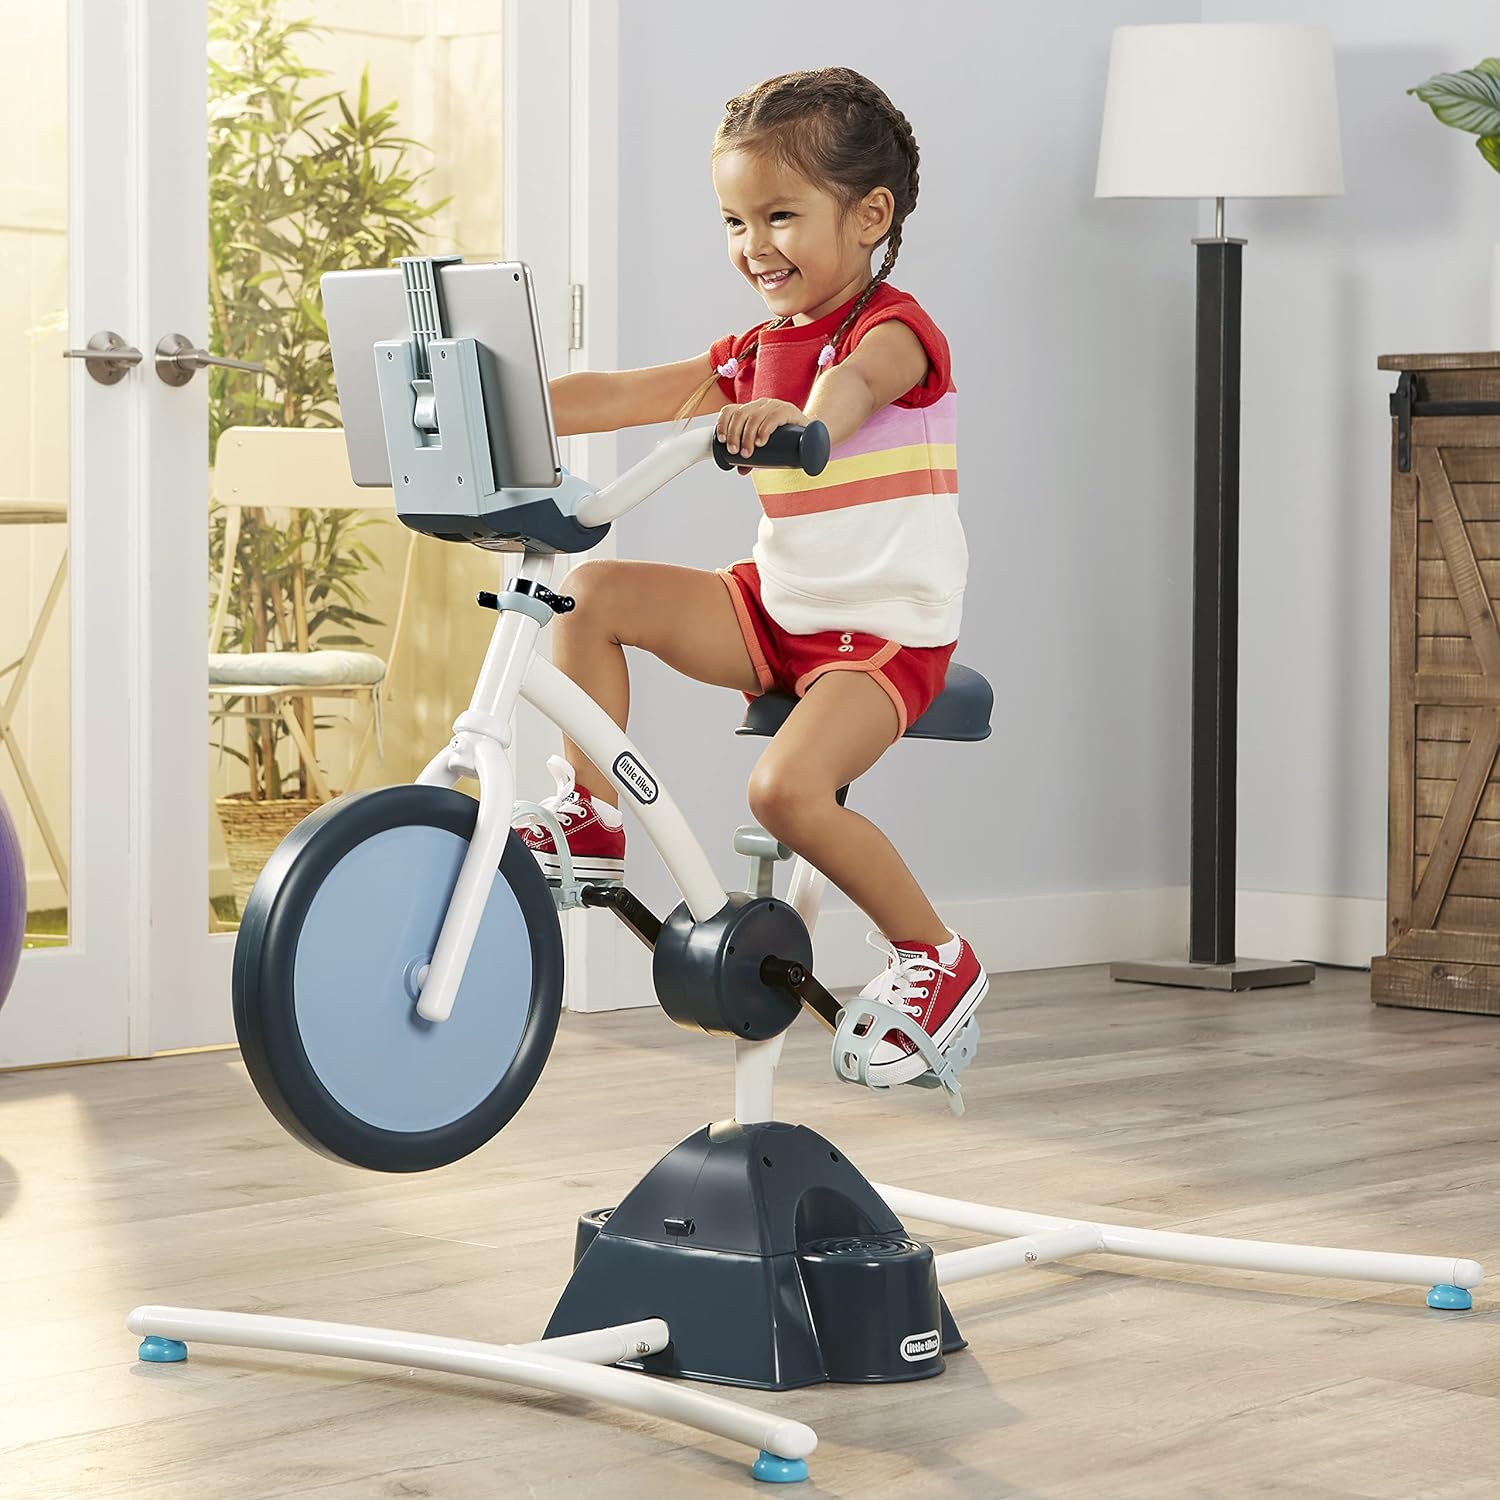 Little Tikes Pelican Explore & Fit Cycle Adjustable Play Fitness Exercise Equipment Stationary Bike with Videos and Built-in Bluetooth Speaker, For Kids Ages 3-7 Years, WHITE, BLUE